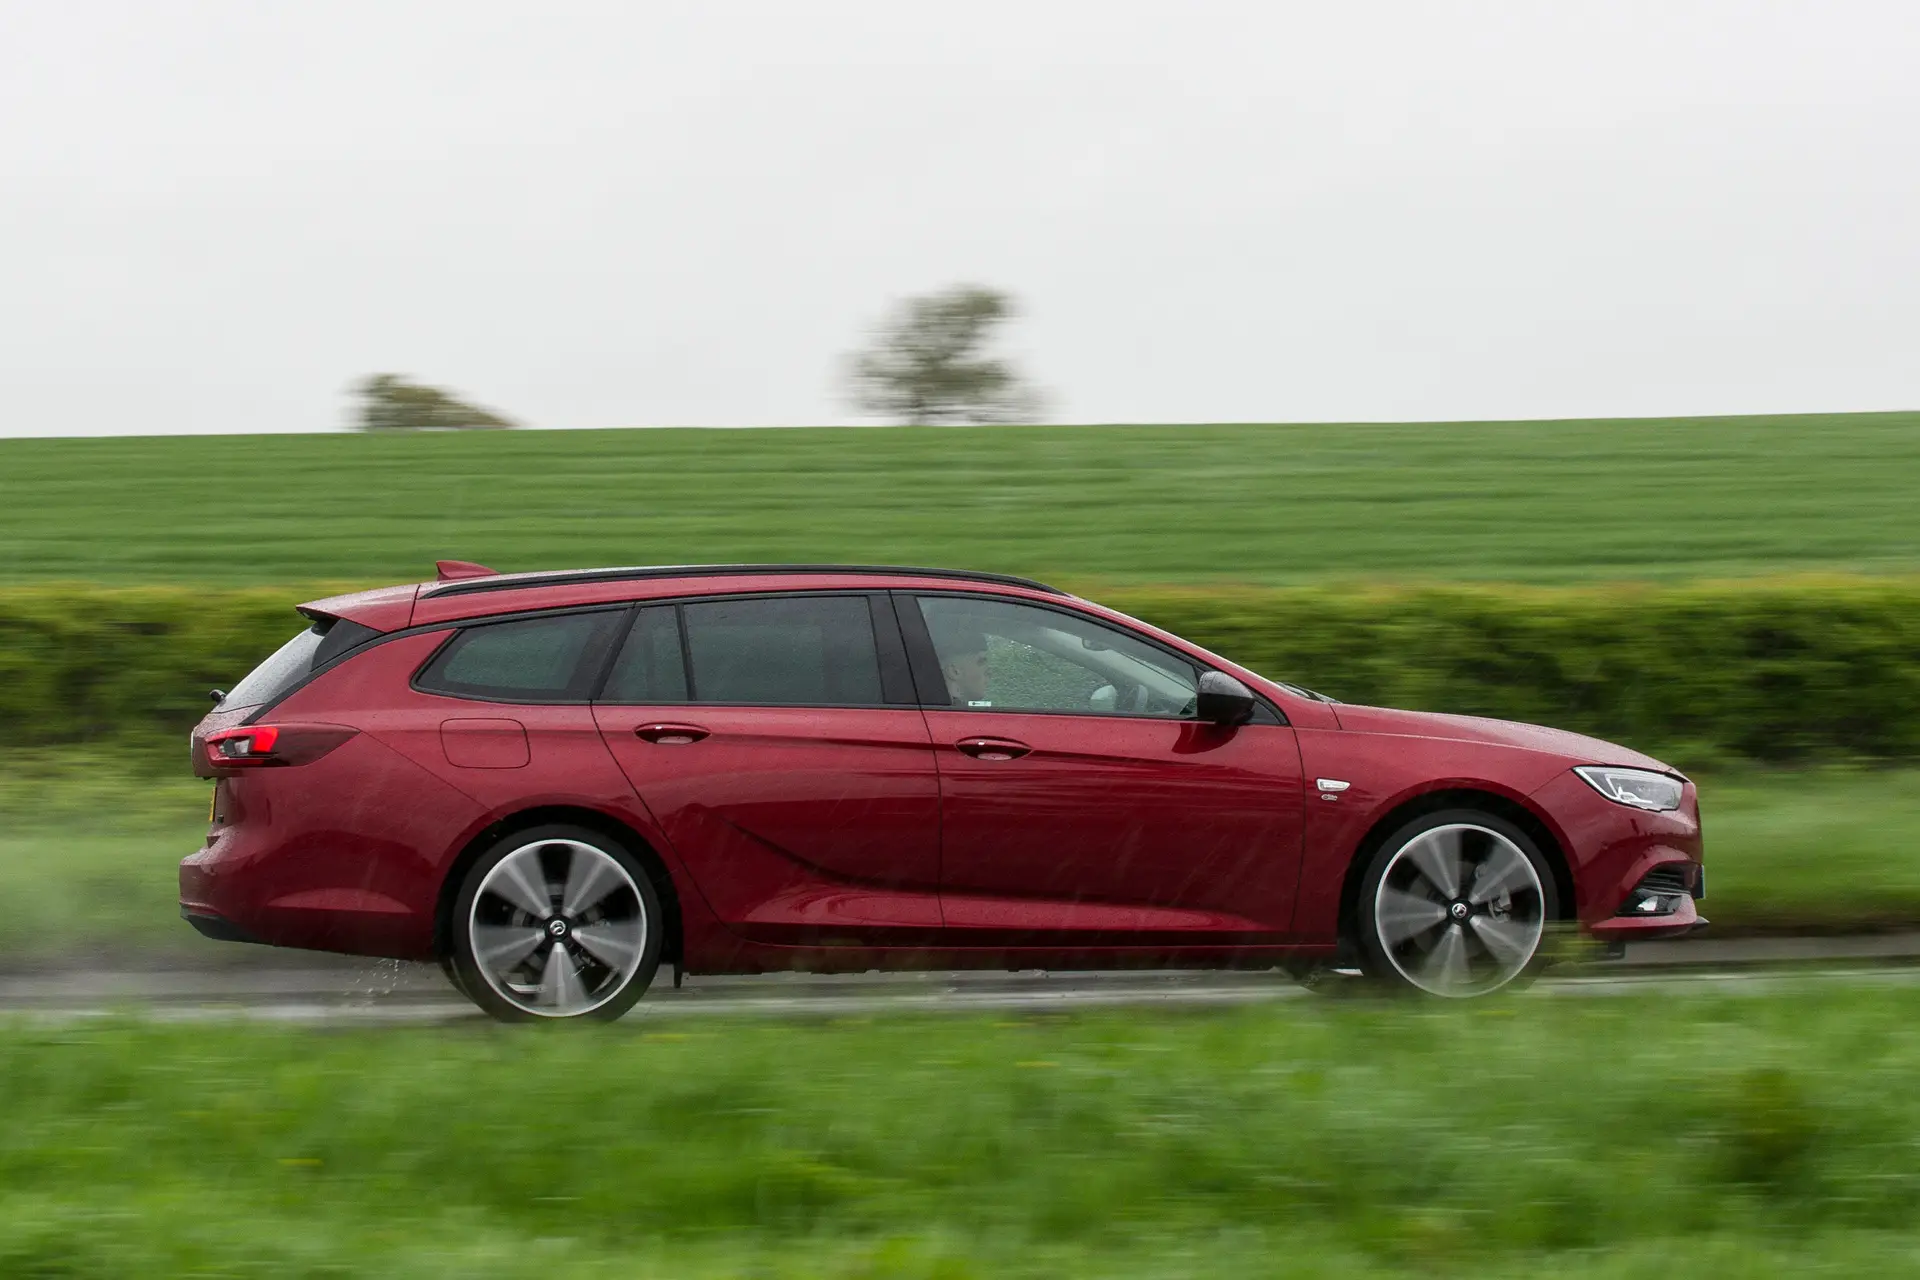 Used Vauxhall Insignia Sports Tourer (2017-2019) Review: exterior side photo of the Vauxhall Insignia Sports Tourer on the road